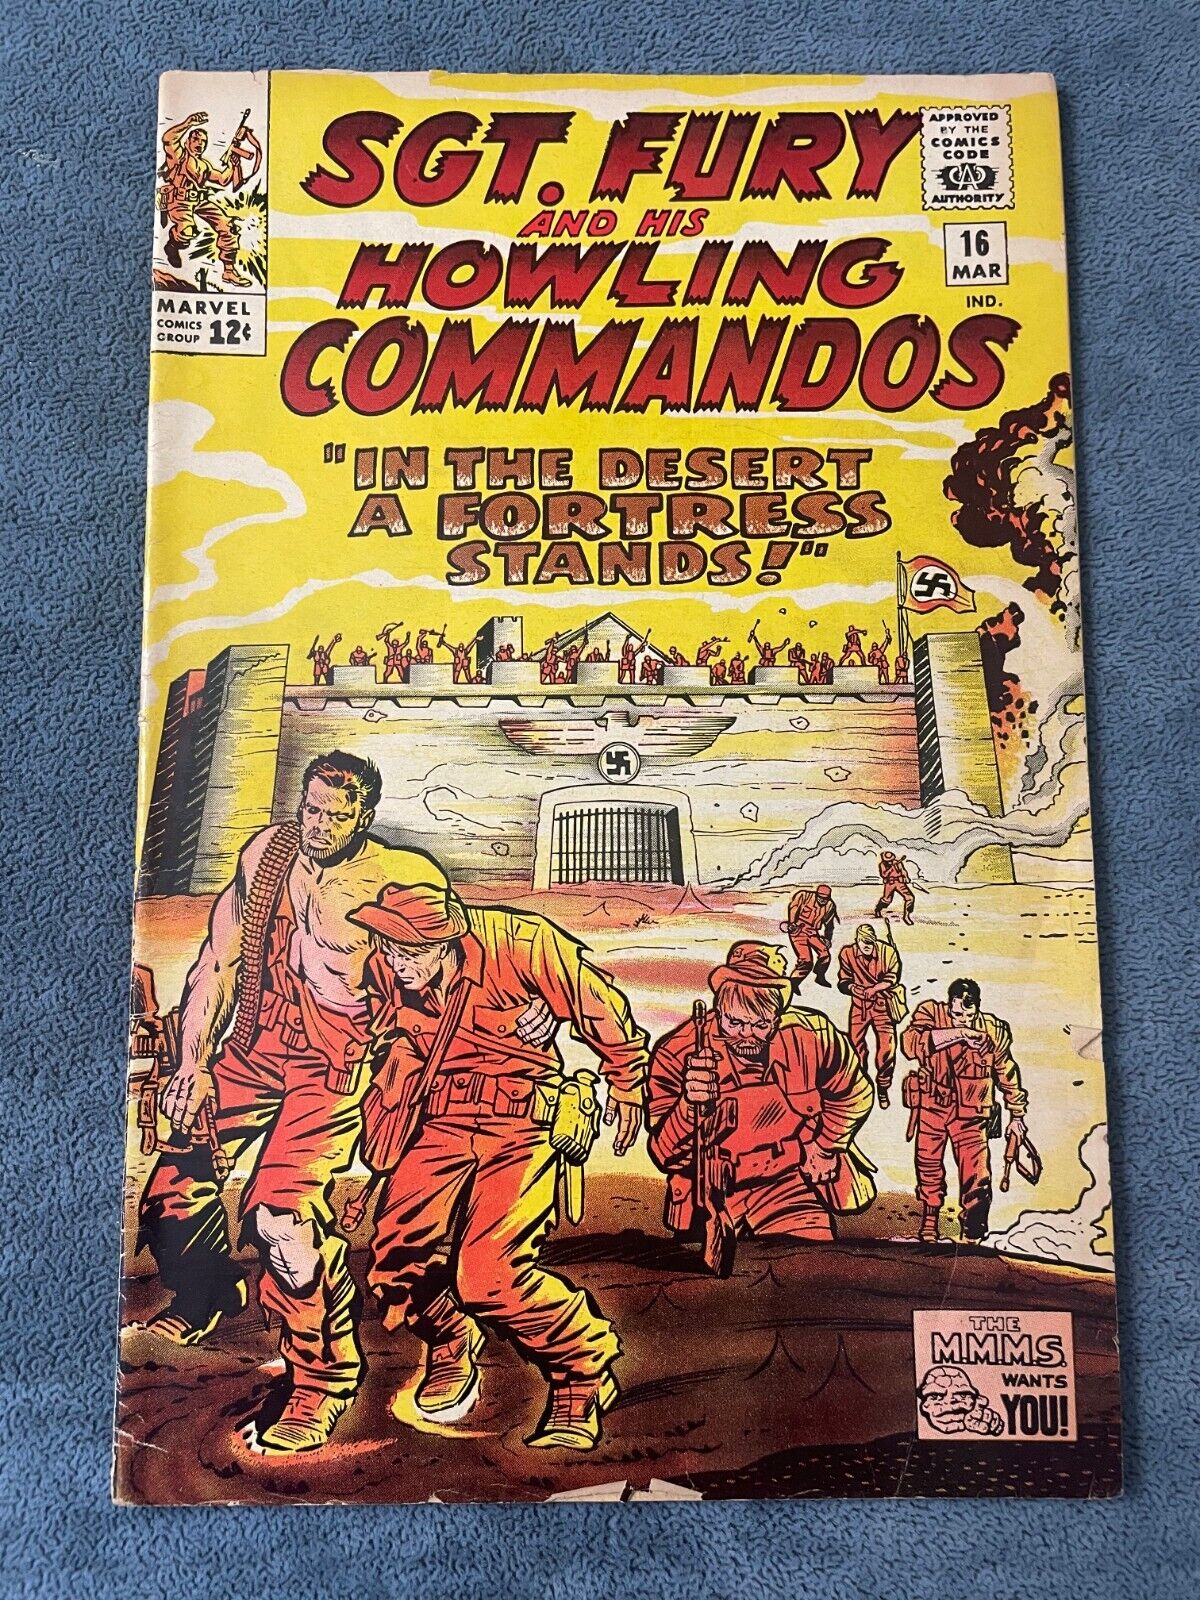 Sgt Fury and His Howling Commandos #16 1965 Marvel Comic Book Kirby VG/FN